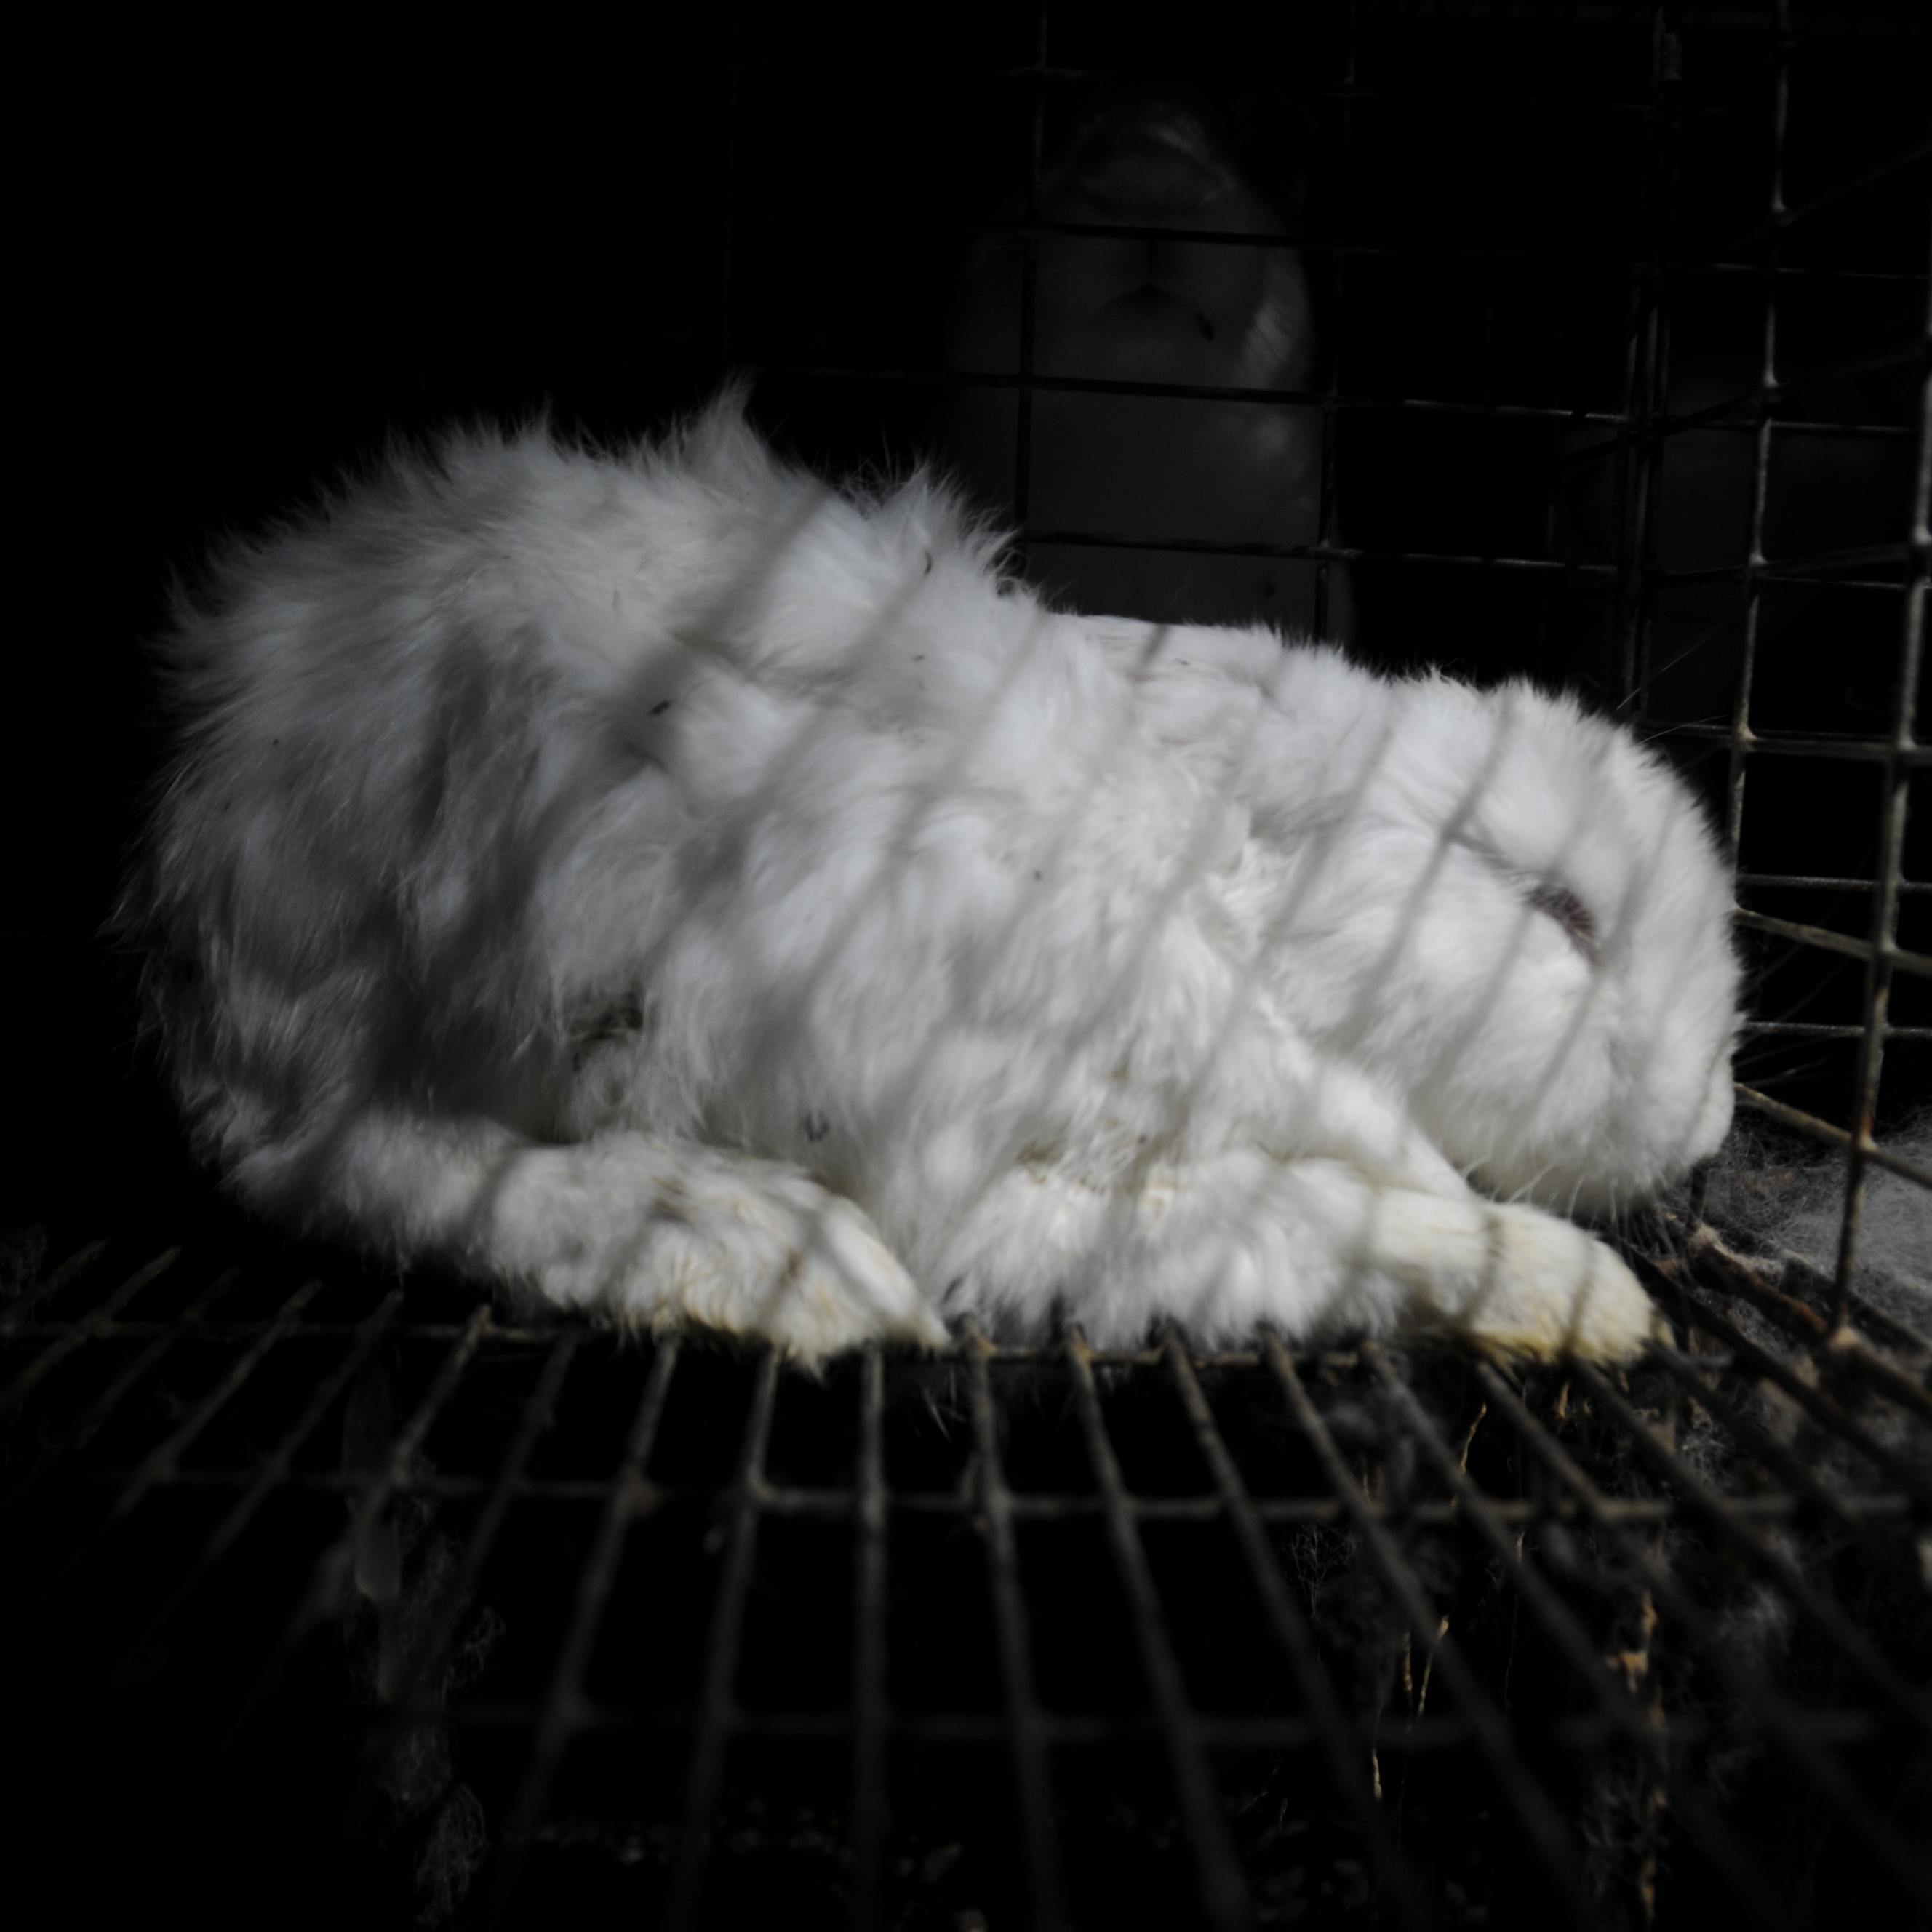 Rabbit inside a cage